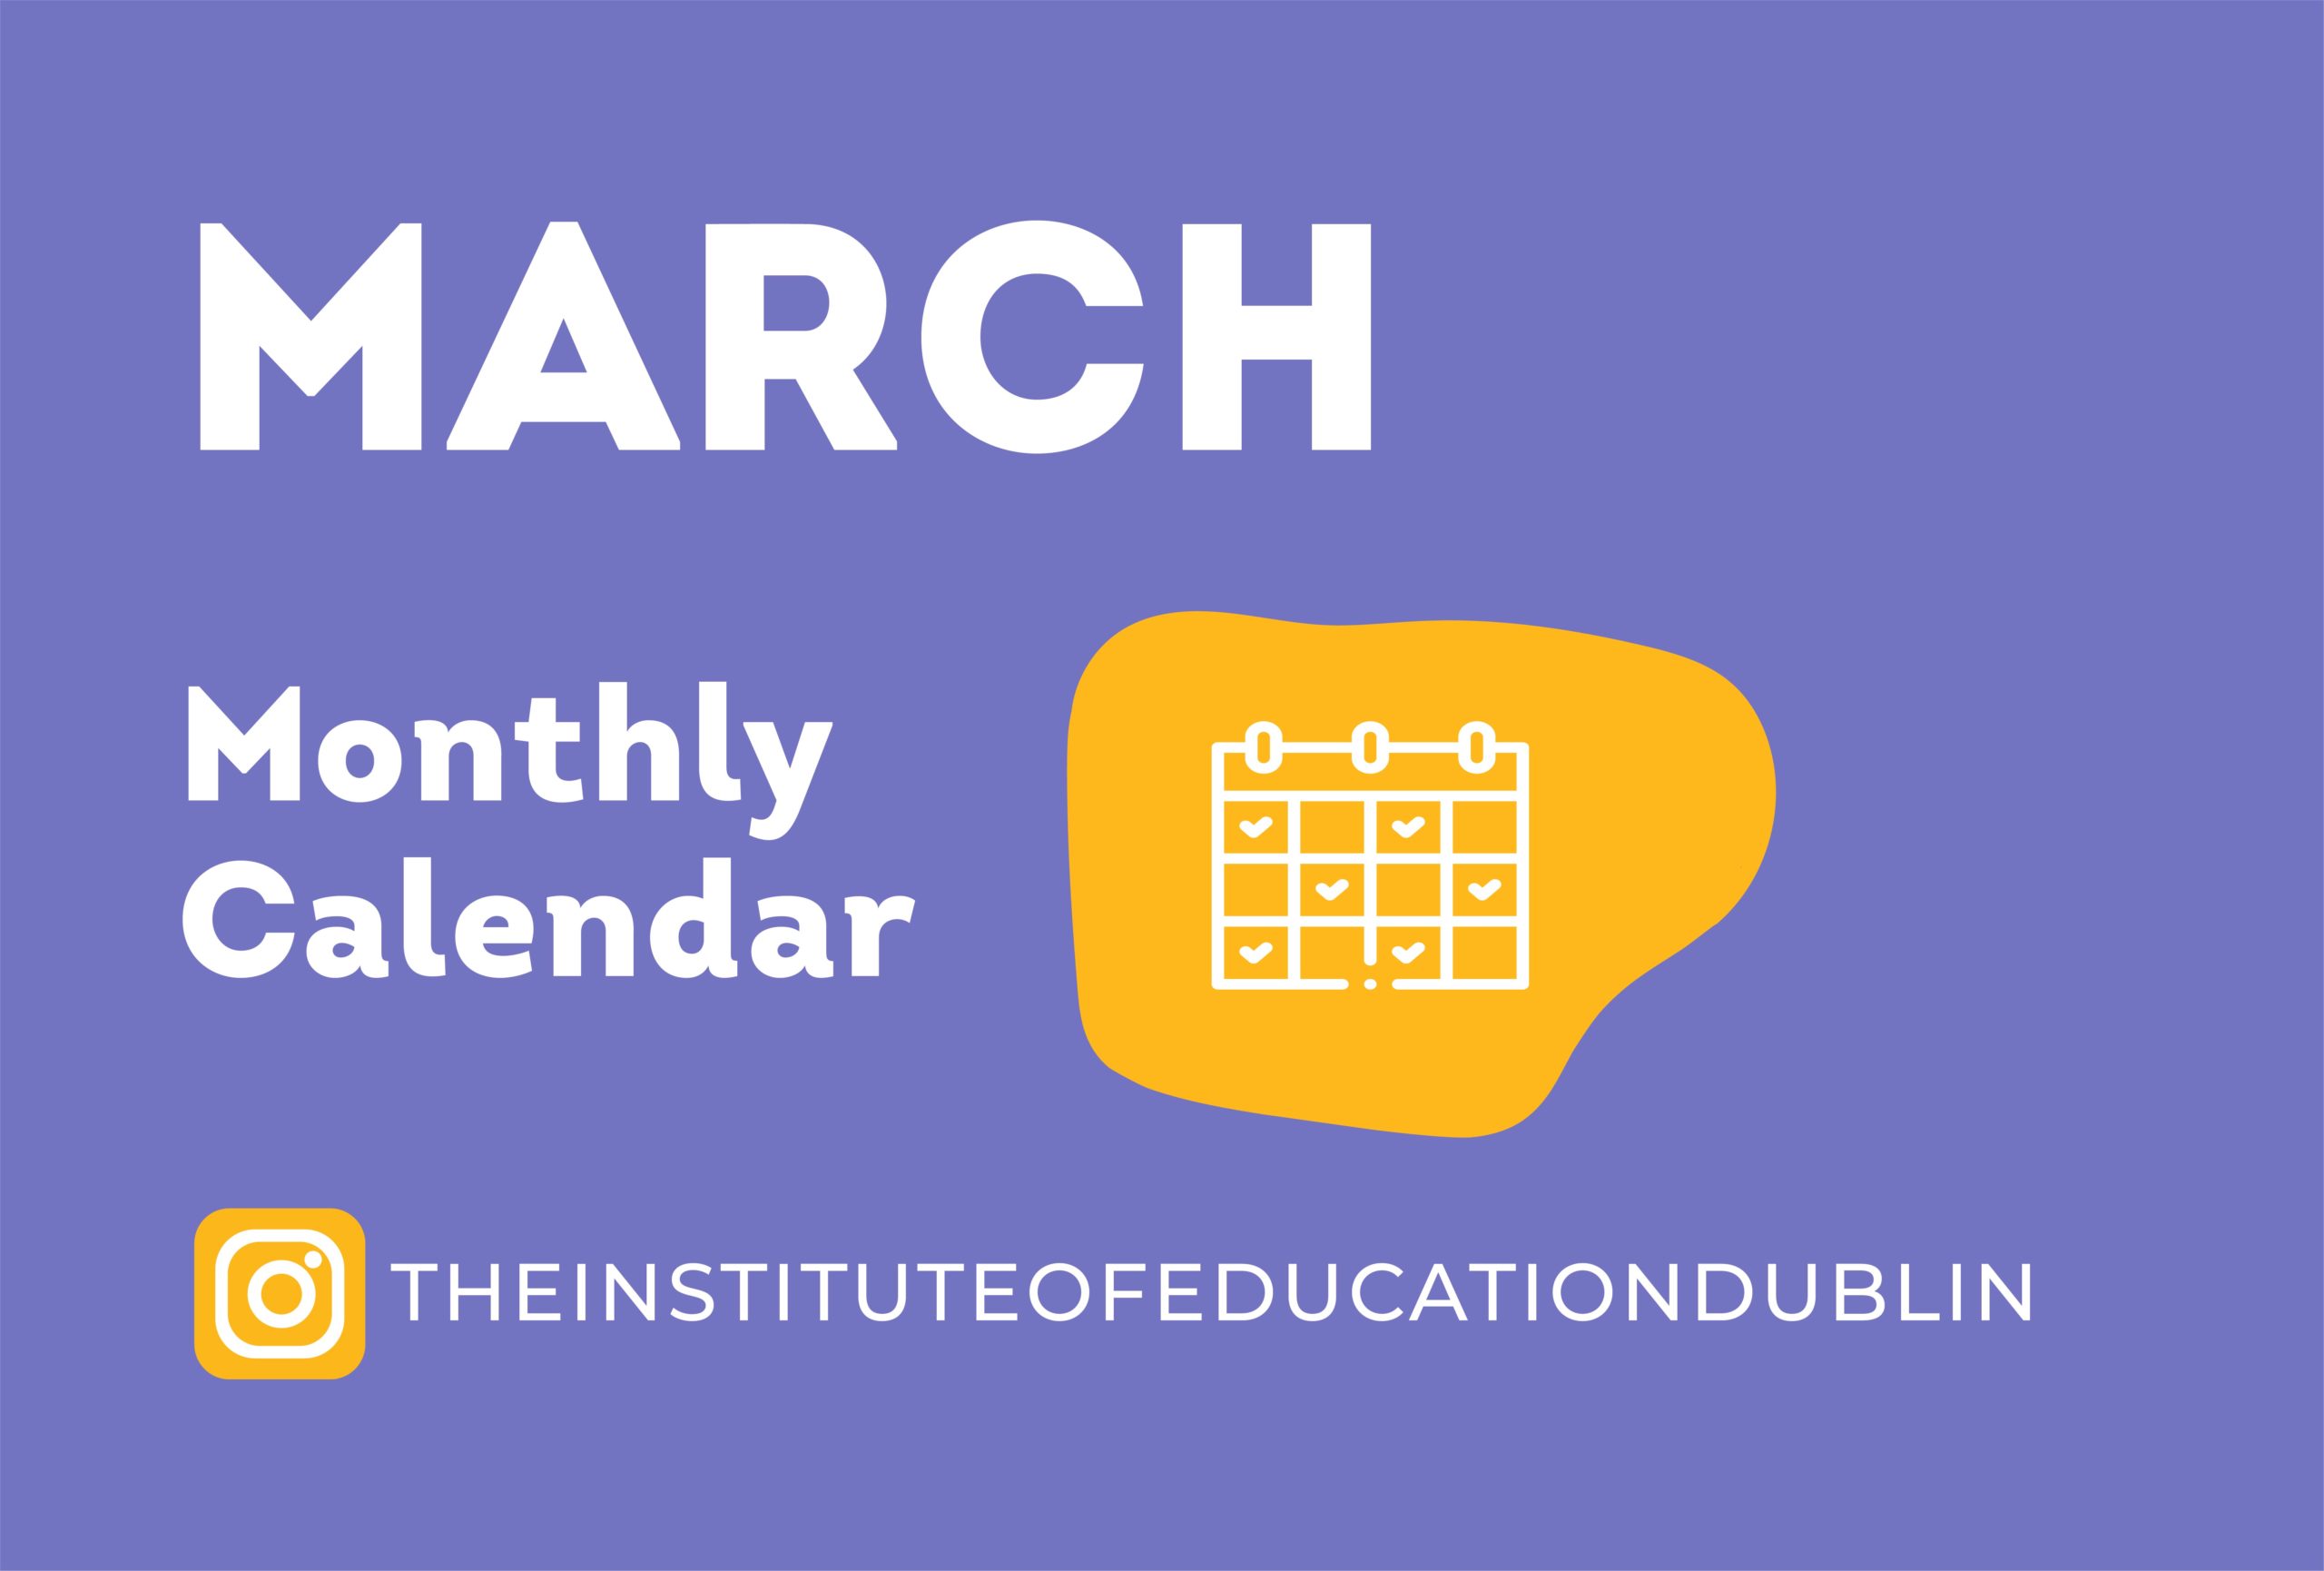 monthly calendar march 2022